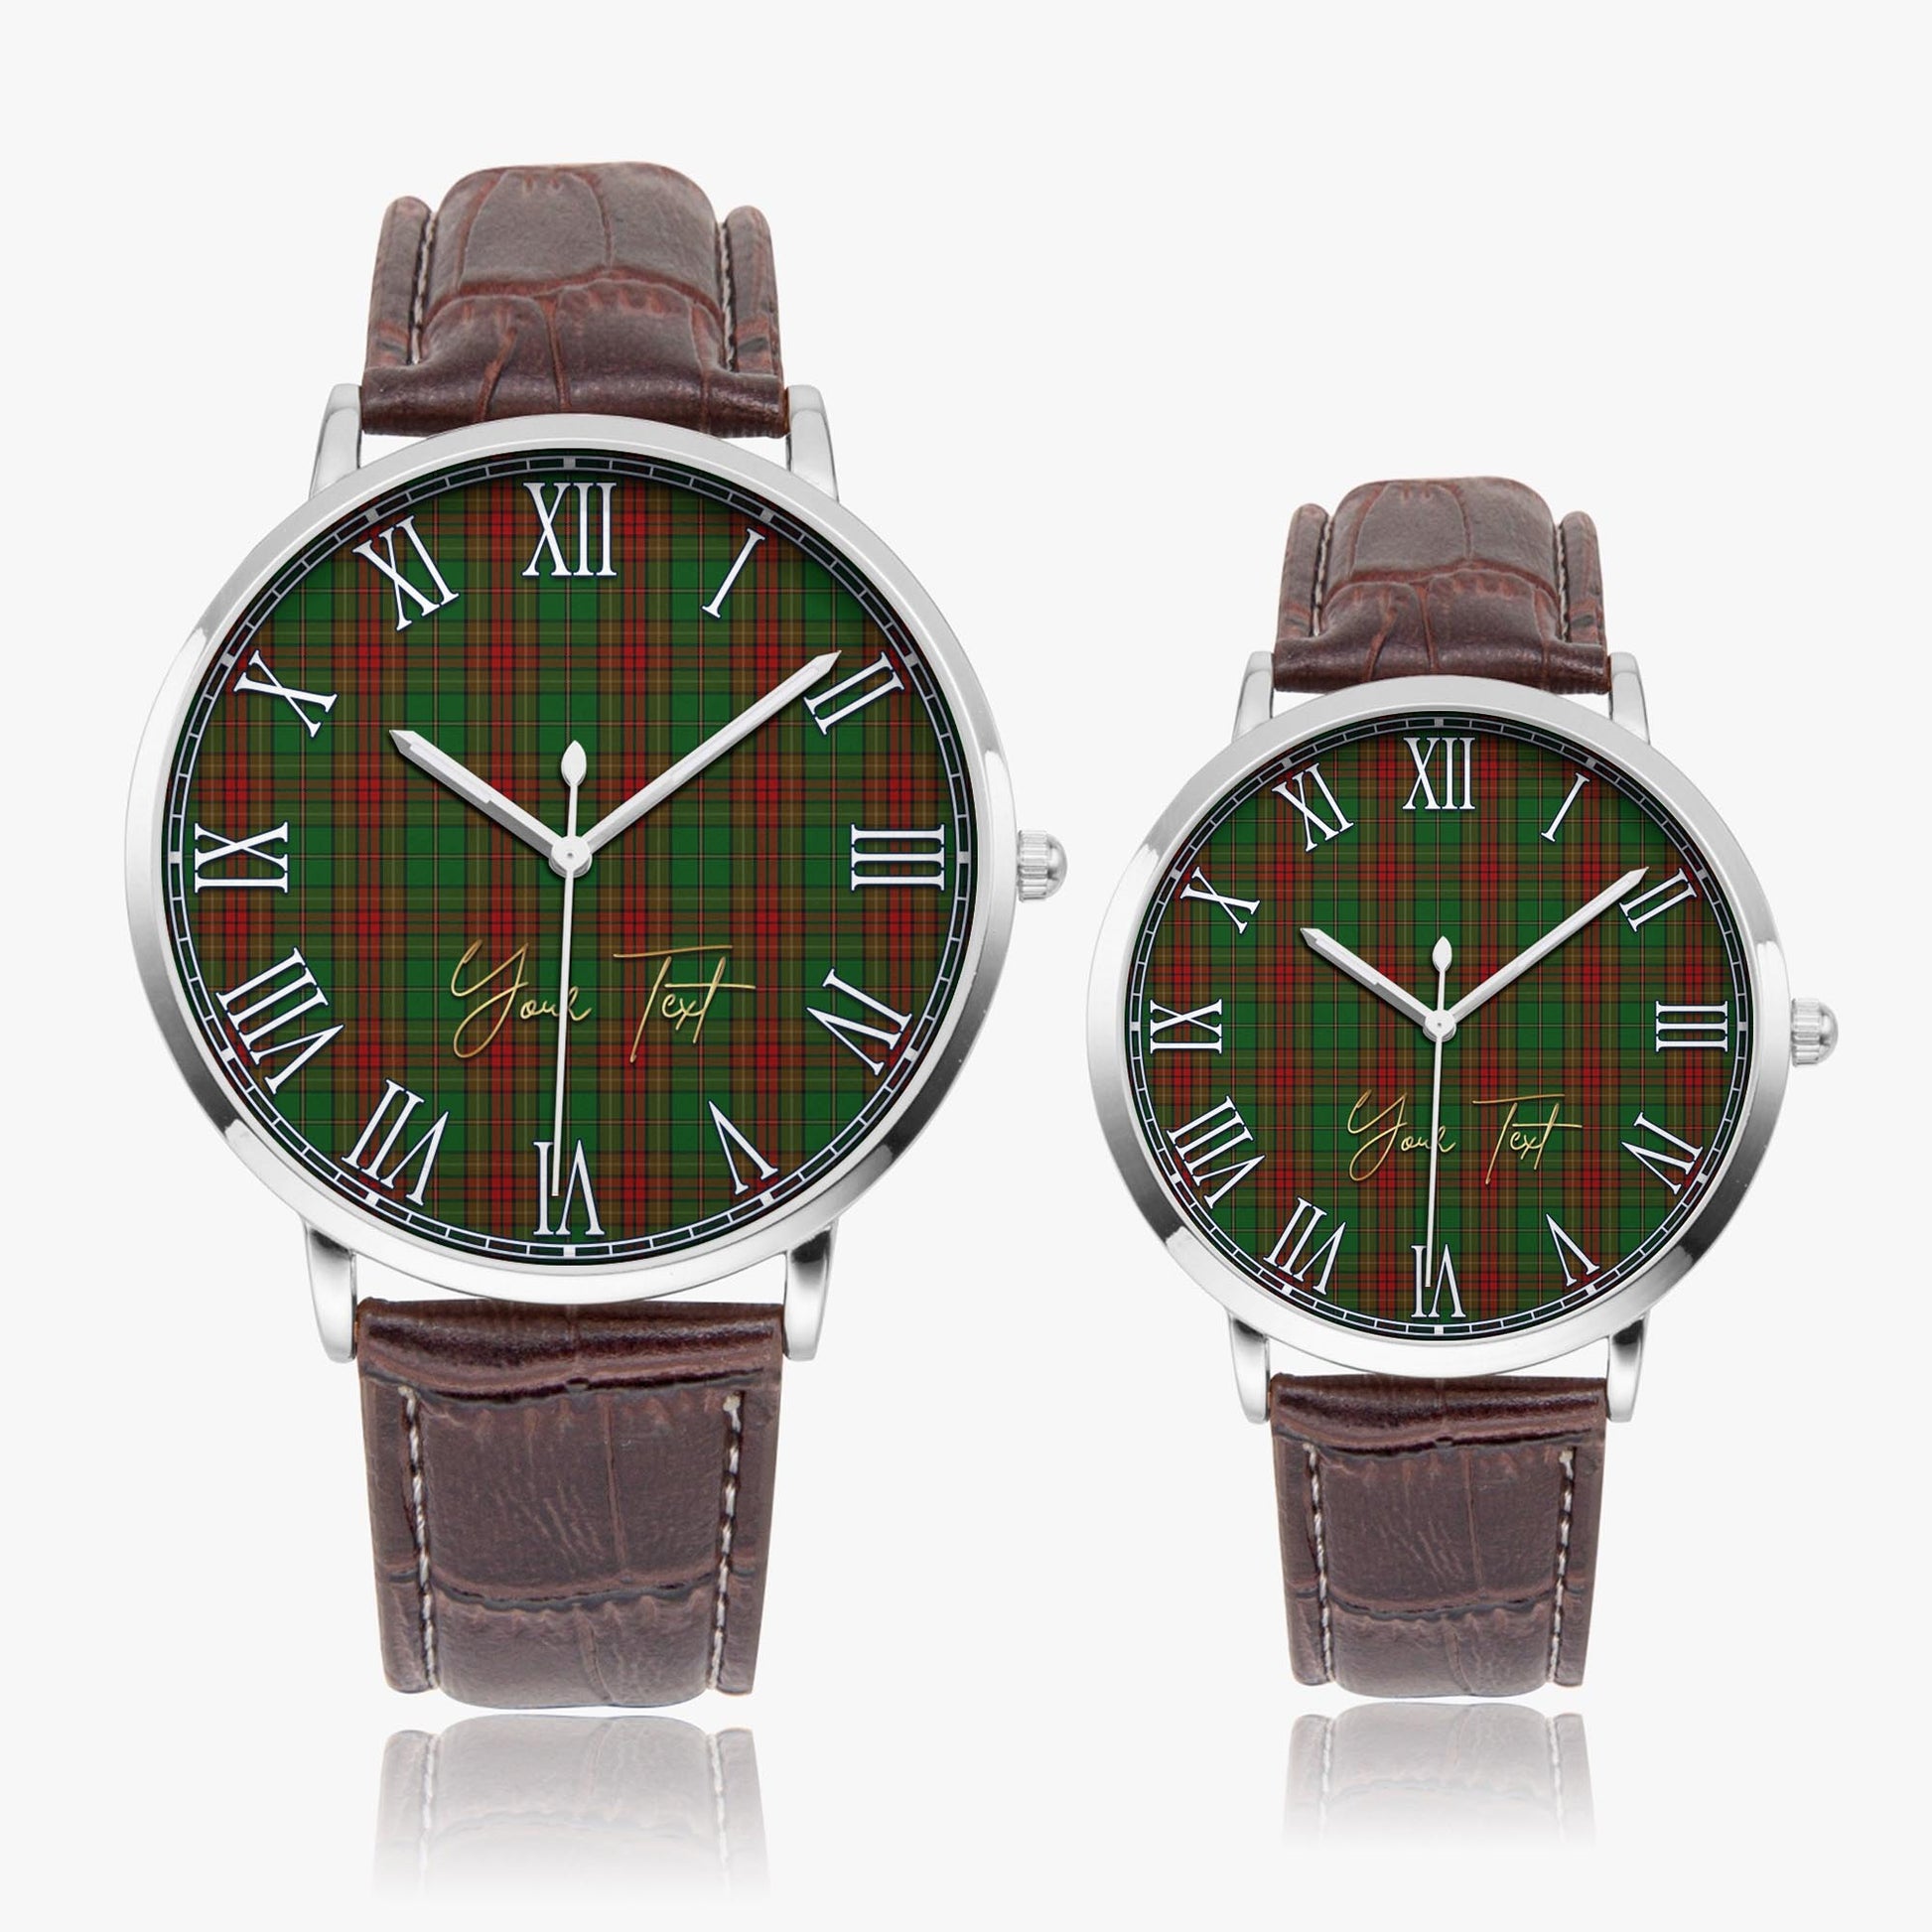 Cavan County Ireland Tartan Personalized Your Text Leather Trap Quartz Watch Ultra Thin Silver Case With Brown Leather Strap - Tartanvibesclothing